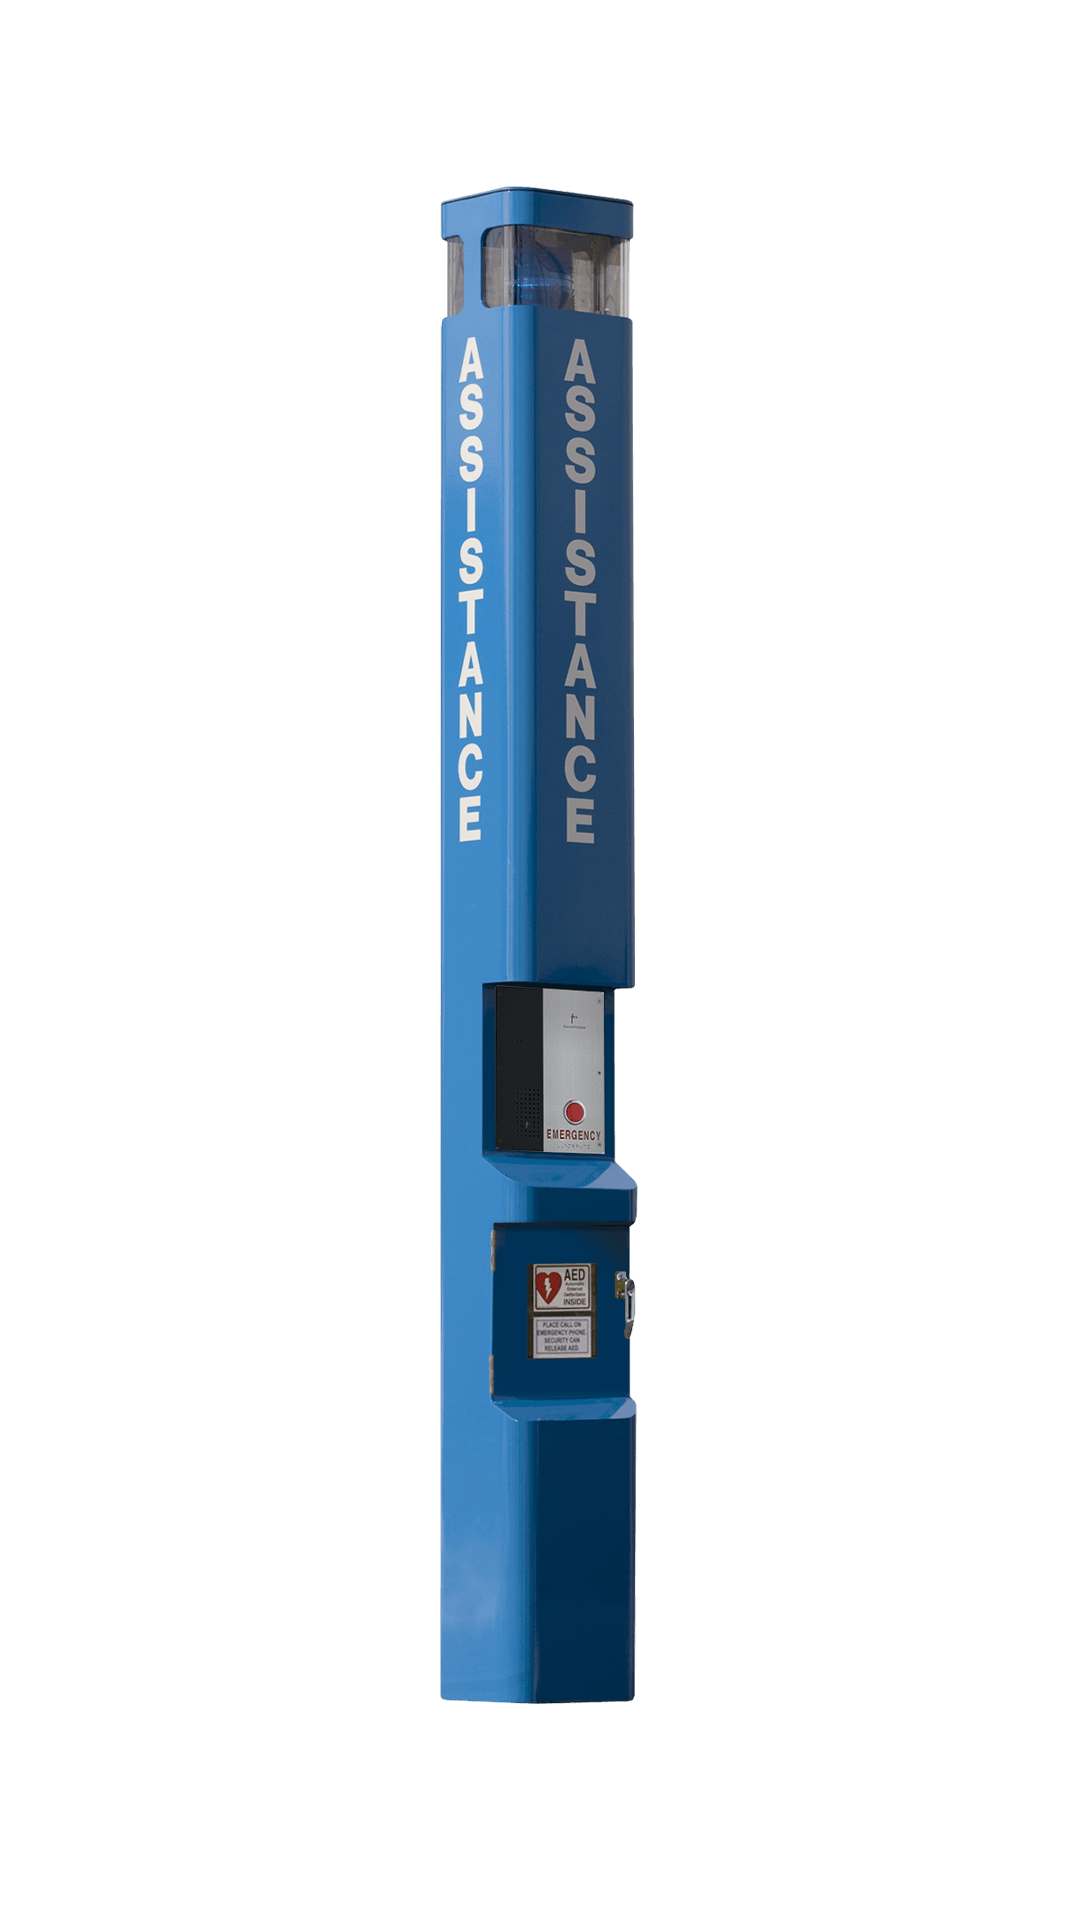 Radius Blue Light Call Station Tower with AED Compartment